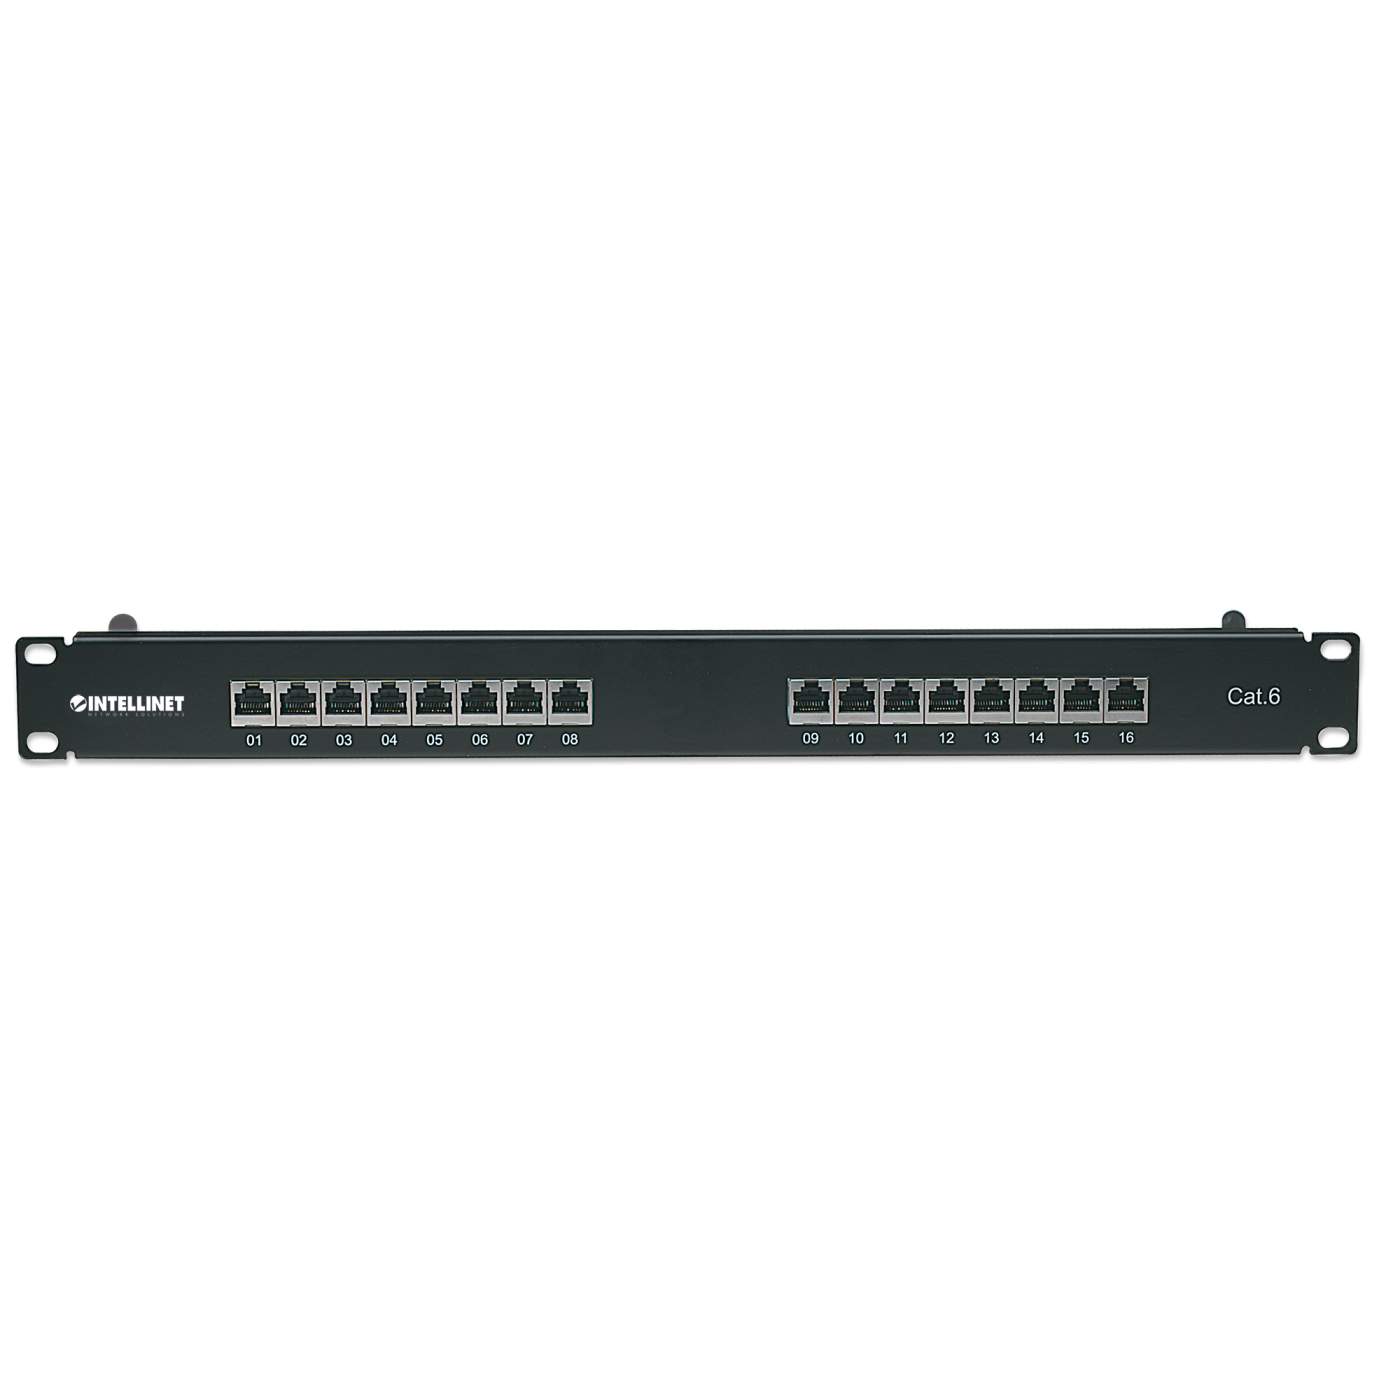 Cat6 Shielded Patch Panel Image 4